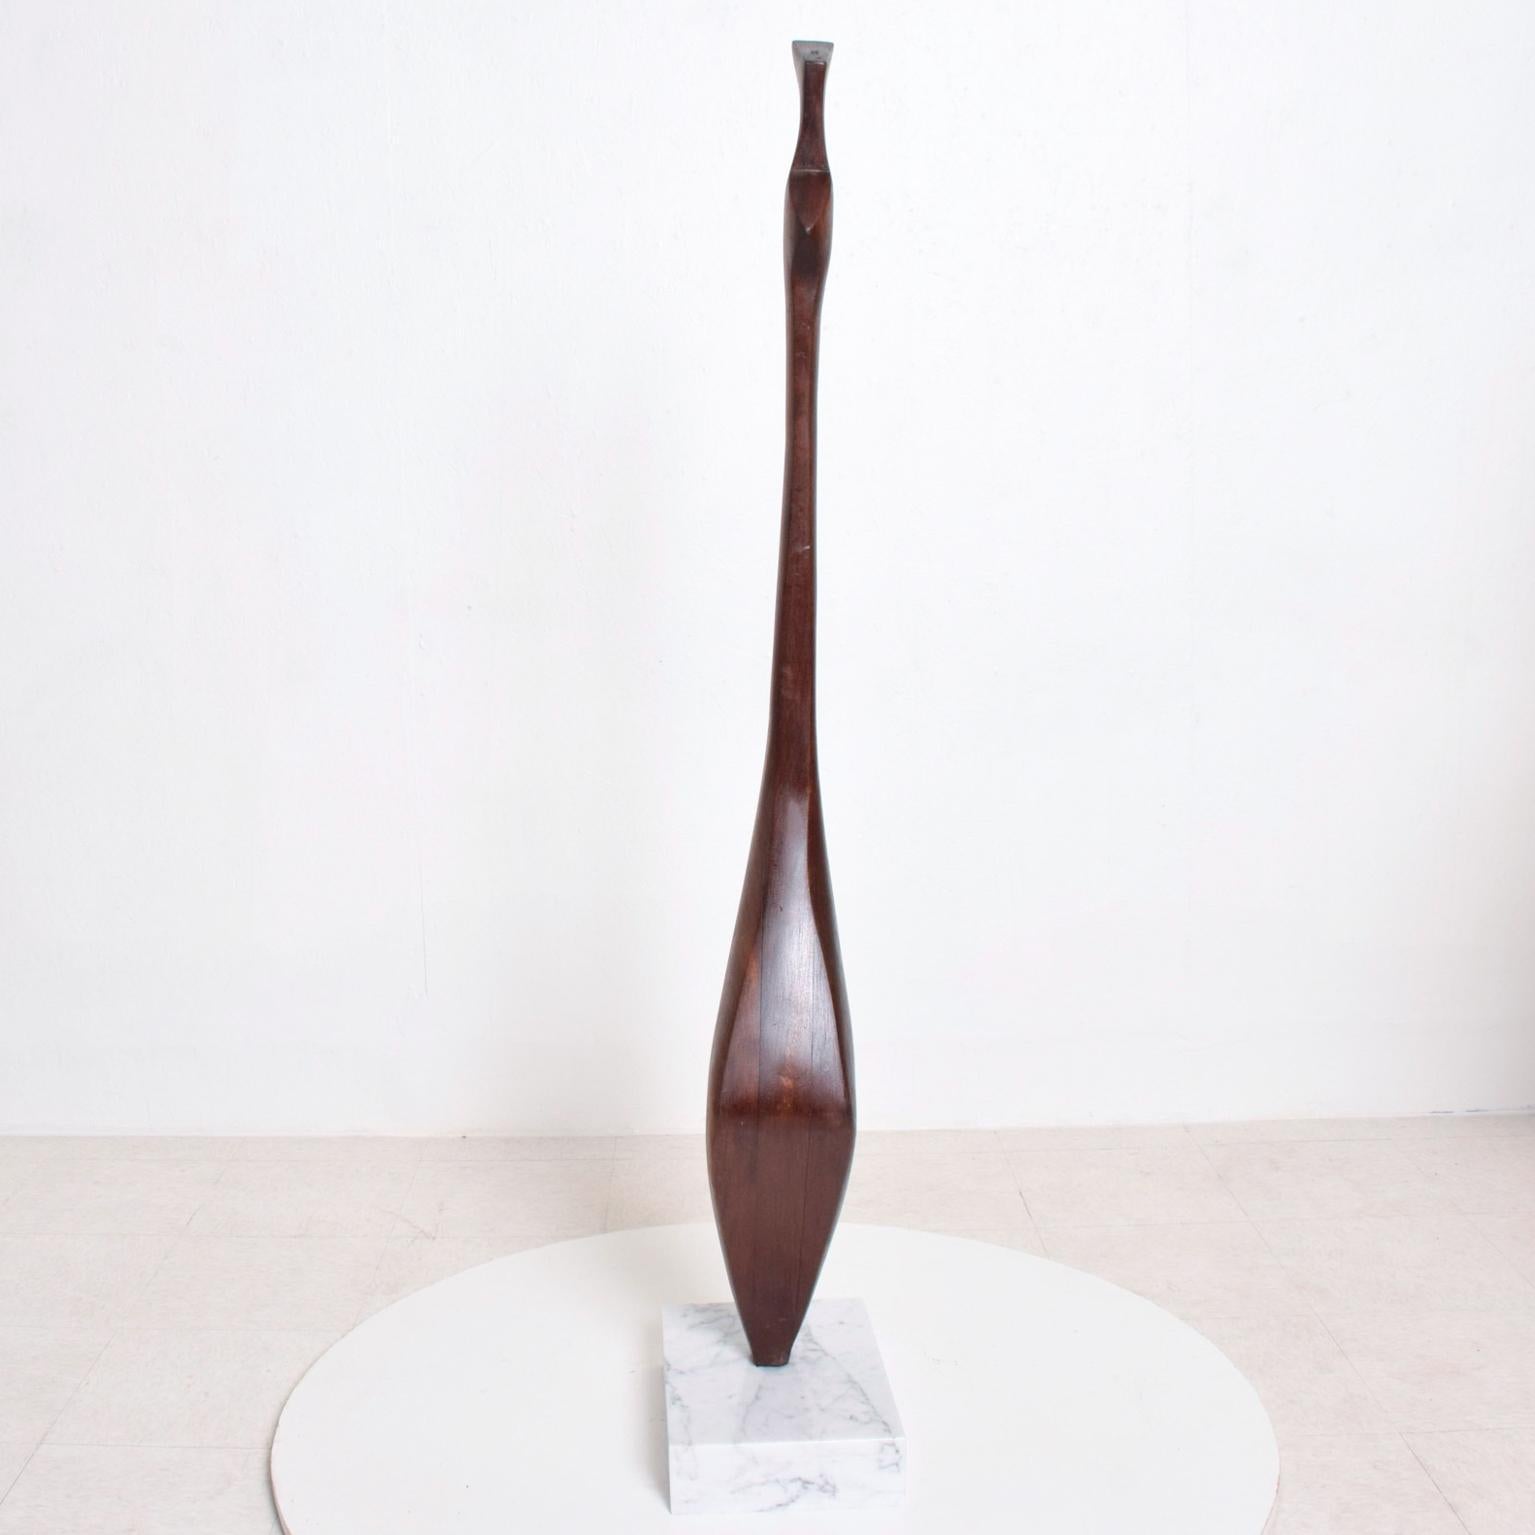 AMBIANIC presents
Organic Modern abstract sculpture in Walnut Wood mounted on a White Carrara Marble Base.
Unsigned. Style representative of George Nakashima Free Form.
USA 1960s
Dimensions: 58H x 13.5 D x 9.25 W. inches
Preowned vintage in very